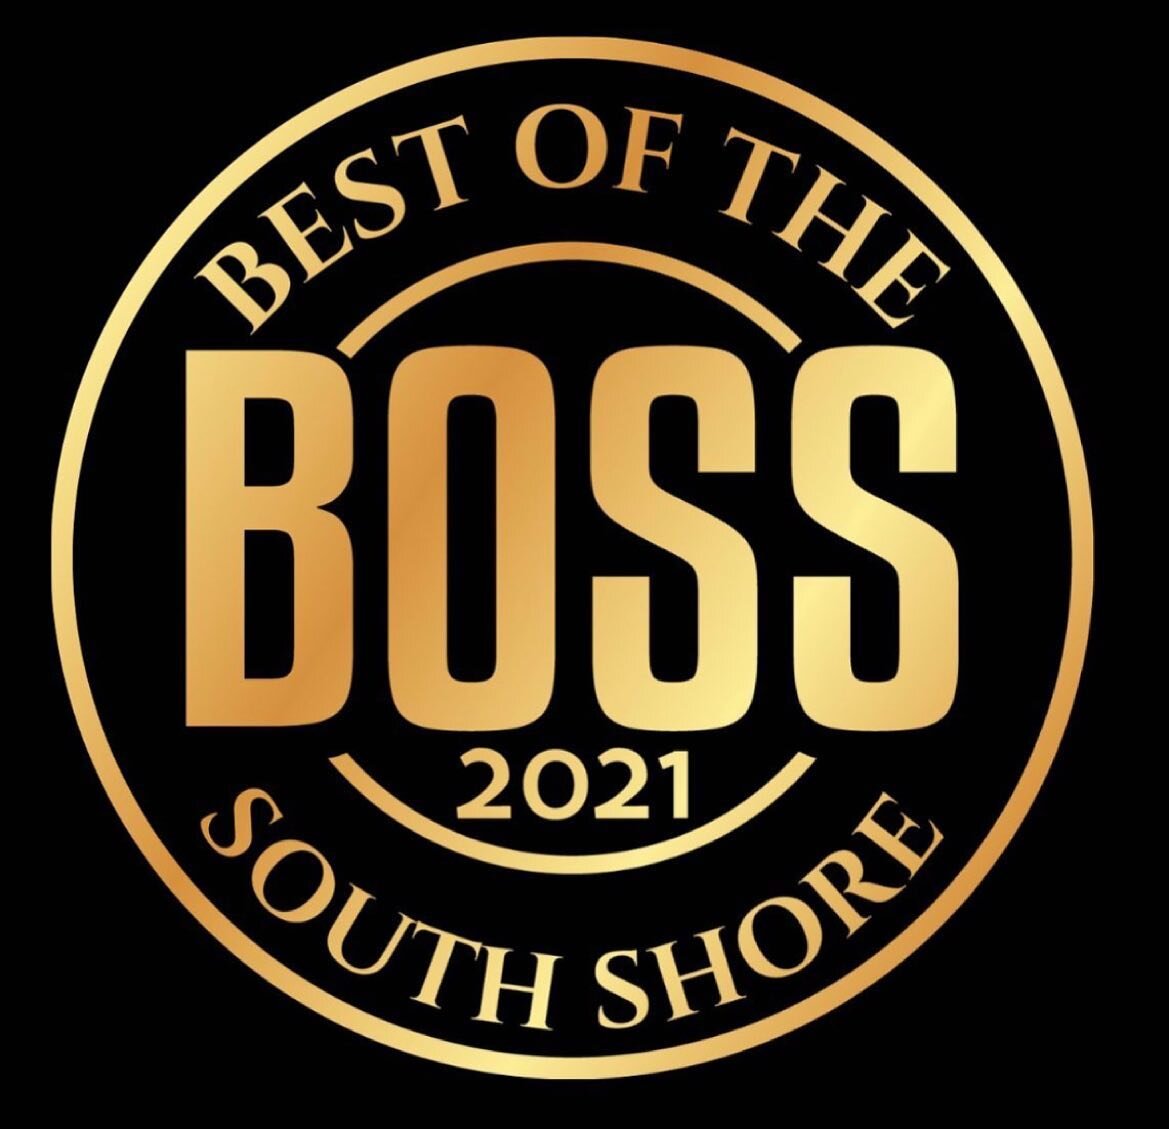 Thanks @southshorehls for naming us the BEST Barber Shop on the South Shore again this year! Huge shoutout to everyone that voted for us, it means the world! ❤️